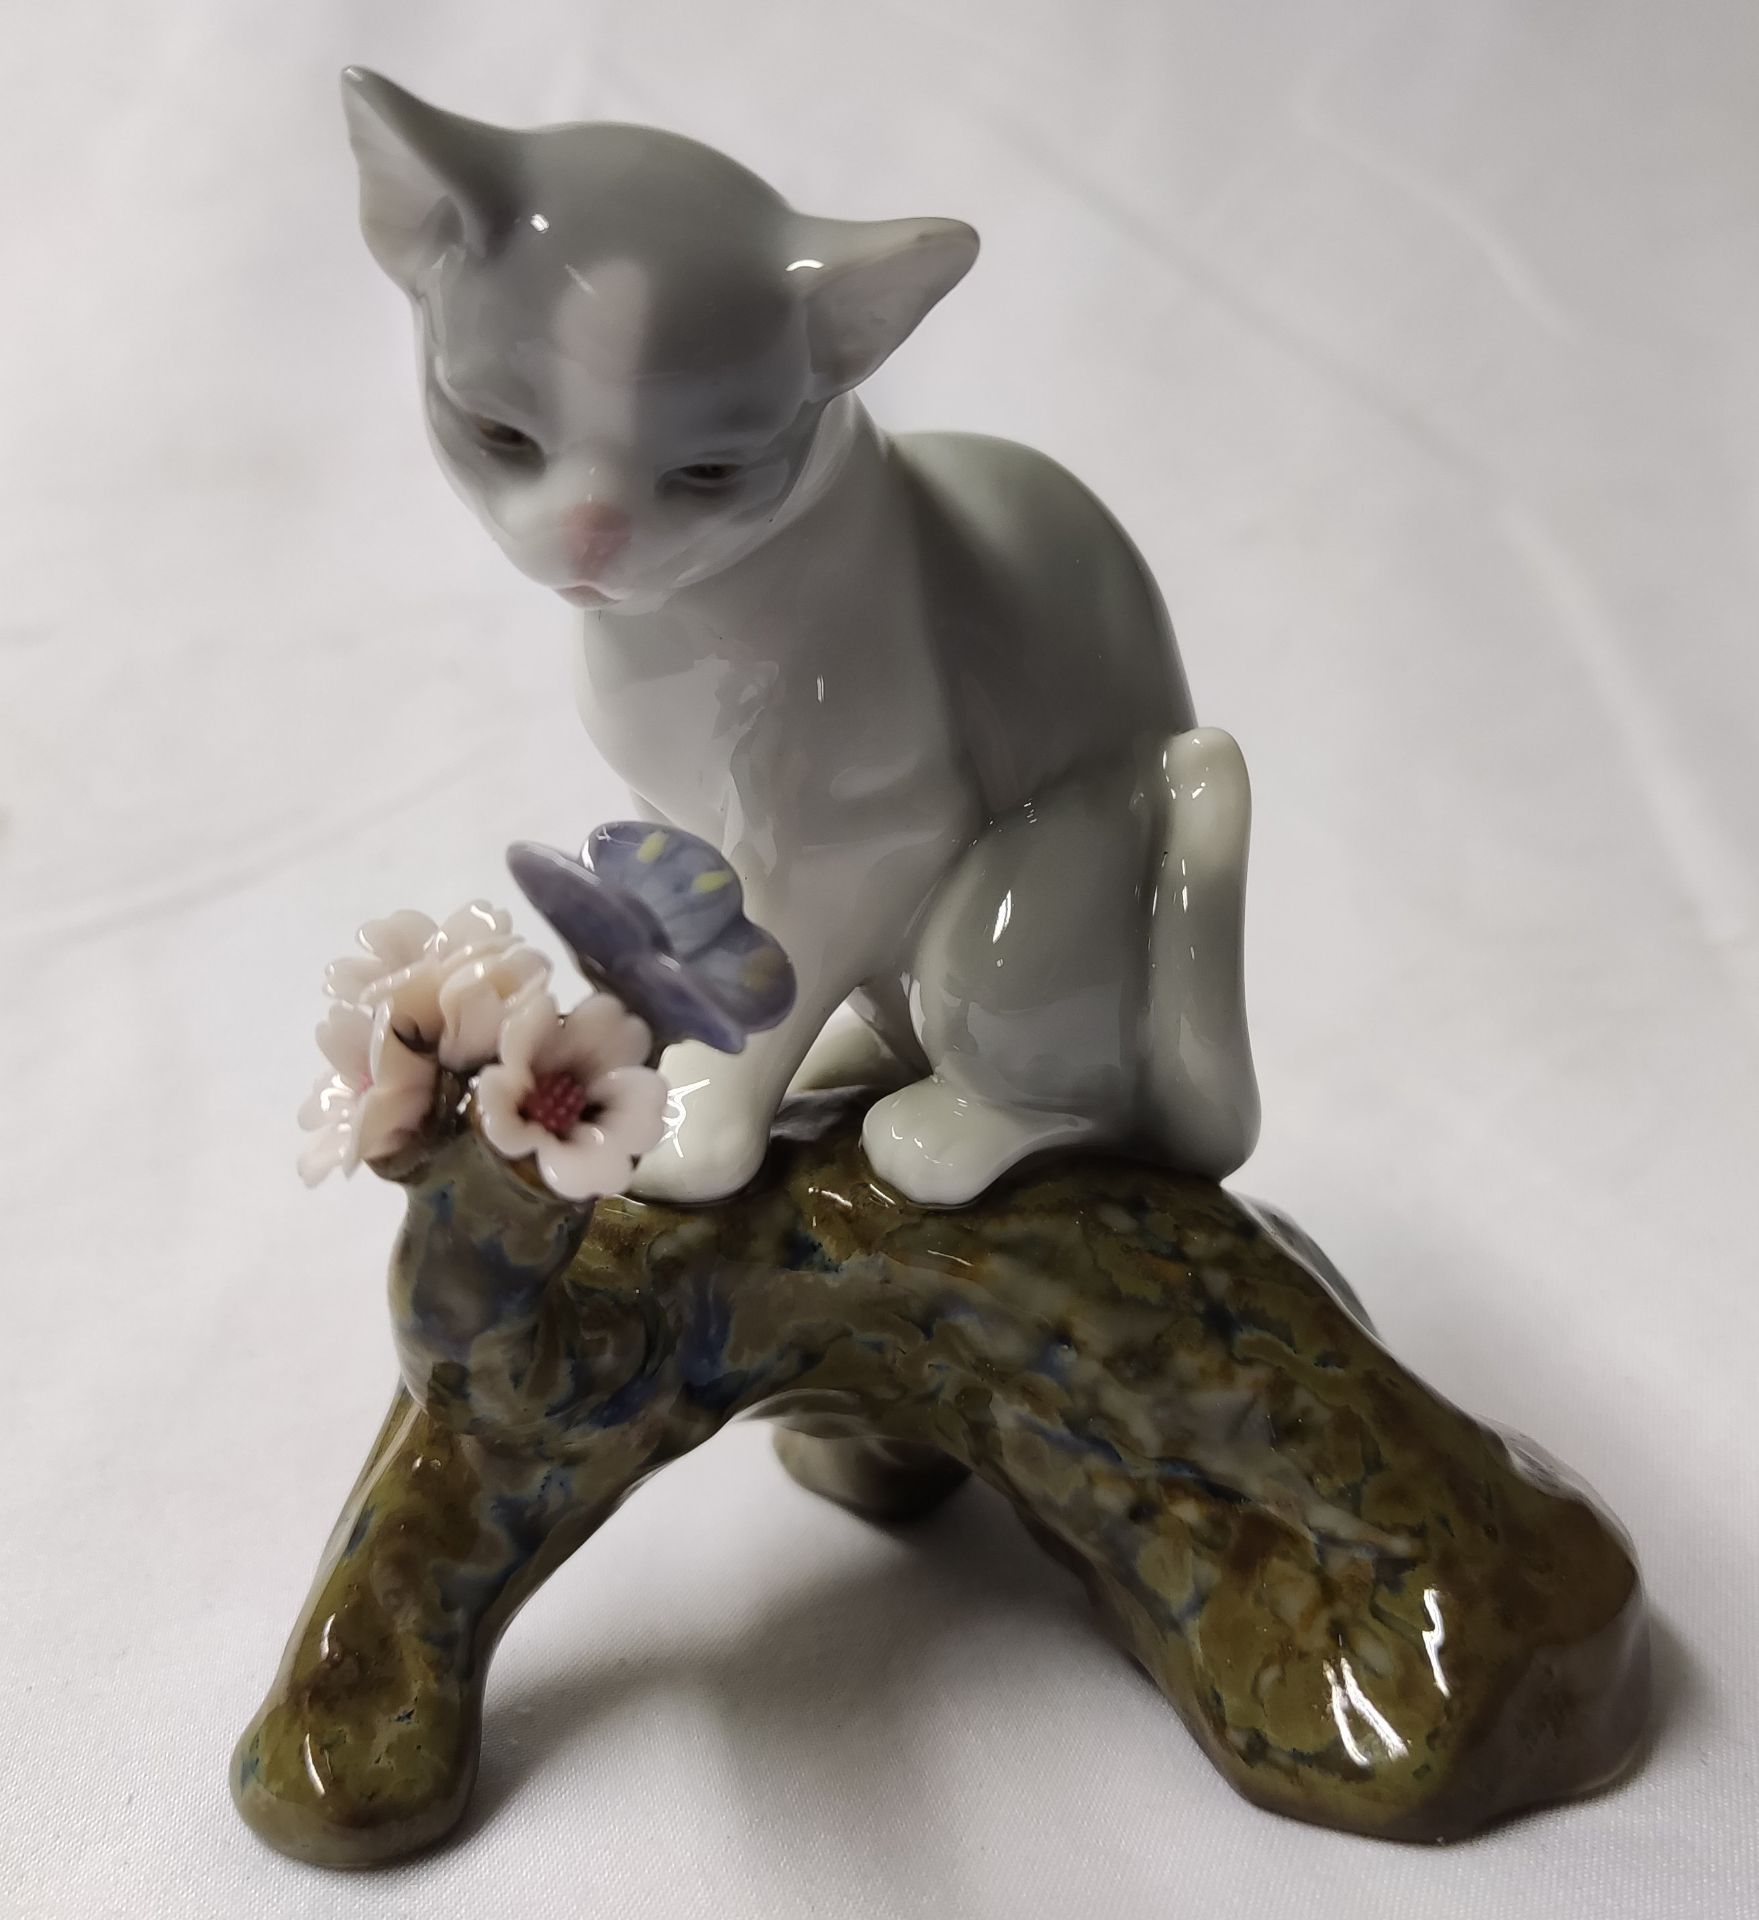 1 x LLADRO Blossoms For The Kitten Cat Porcelain Figurine - New/Boxed - RRP £270 - Ref: /HOC243/ - Image 6 of 21